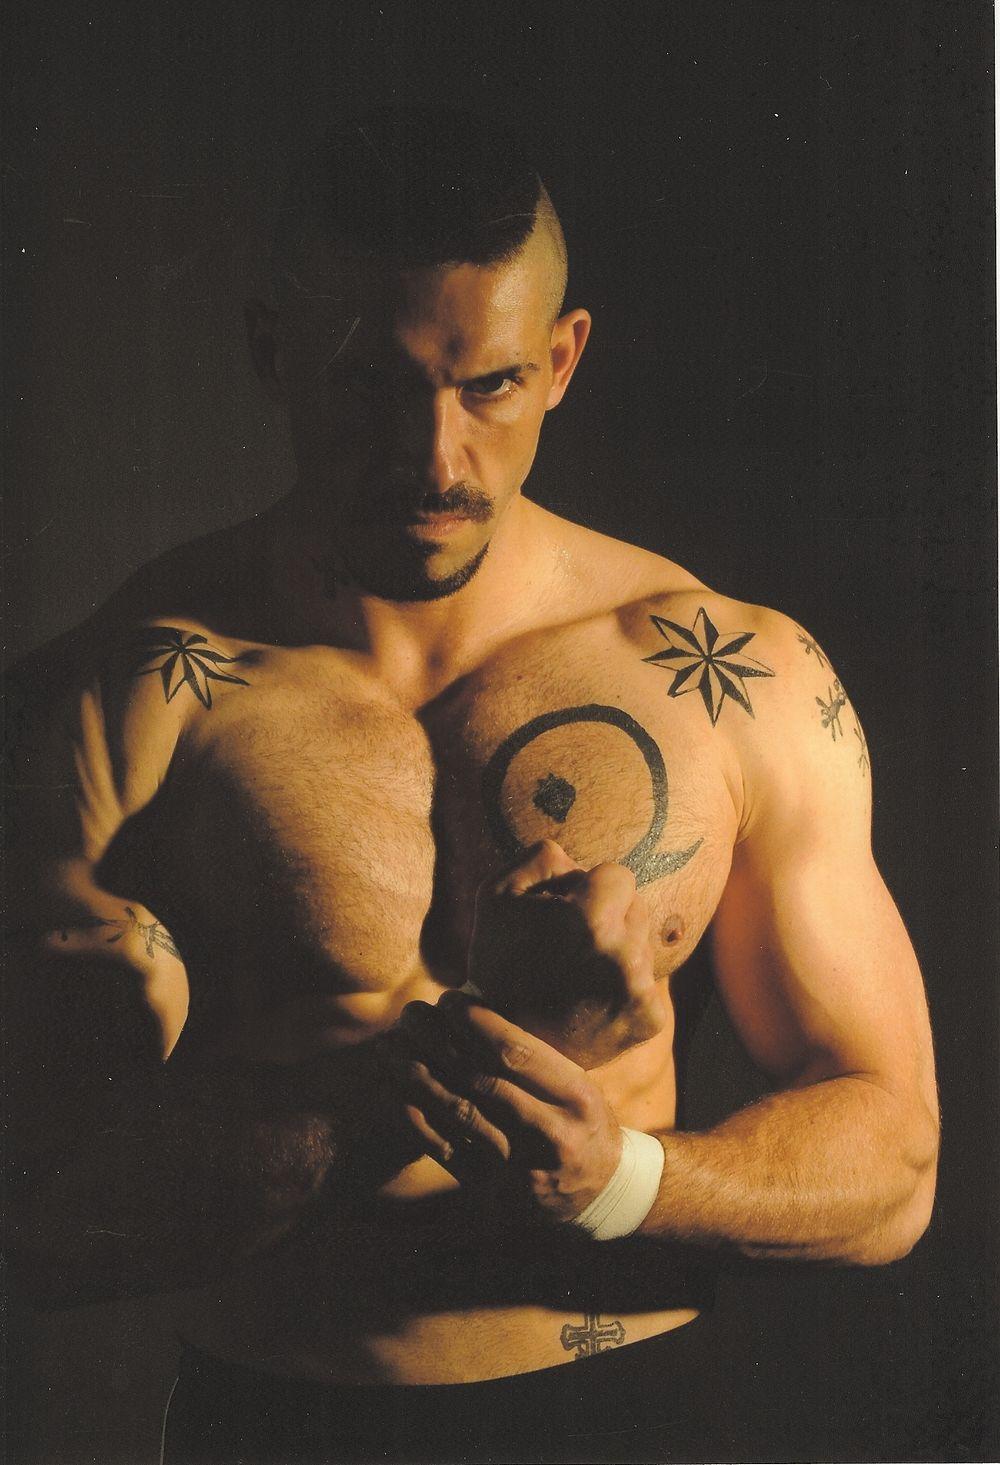 Best image about YURI BOYKA ´´THE BEST FIGHTER OF THE WORLD